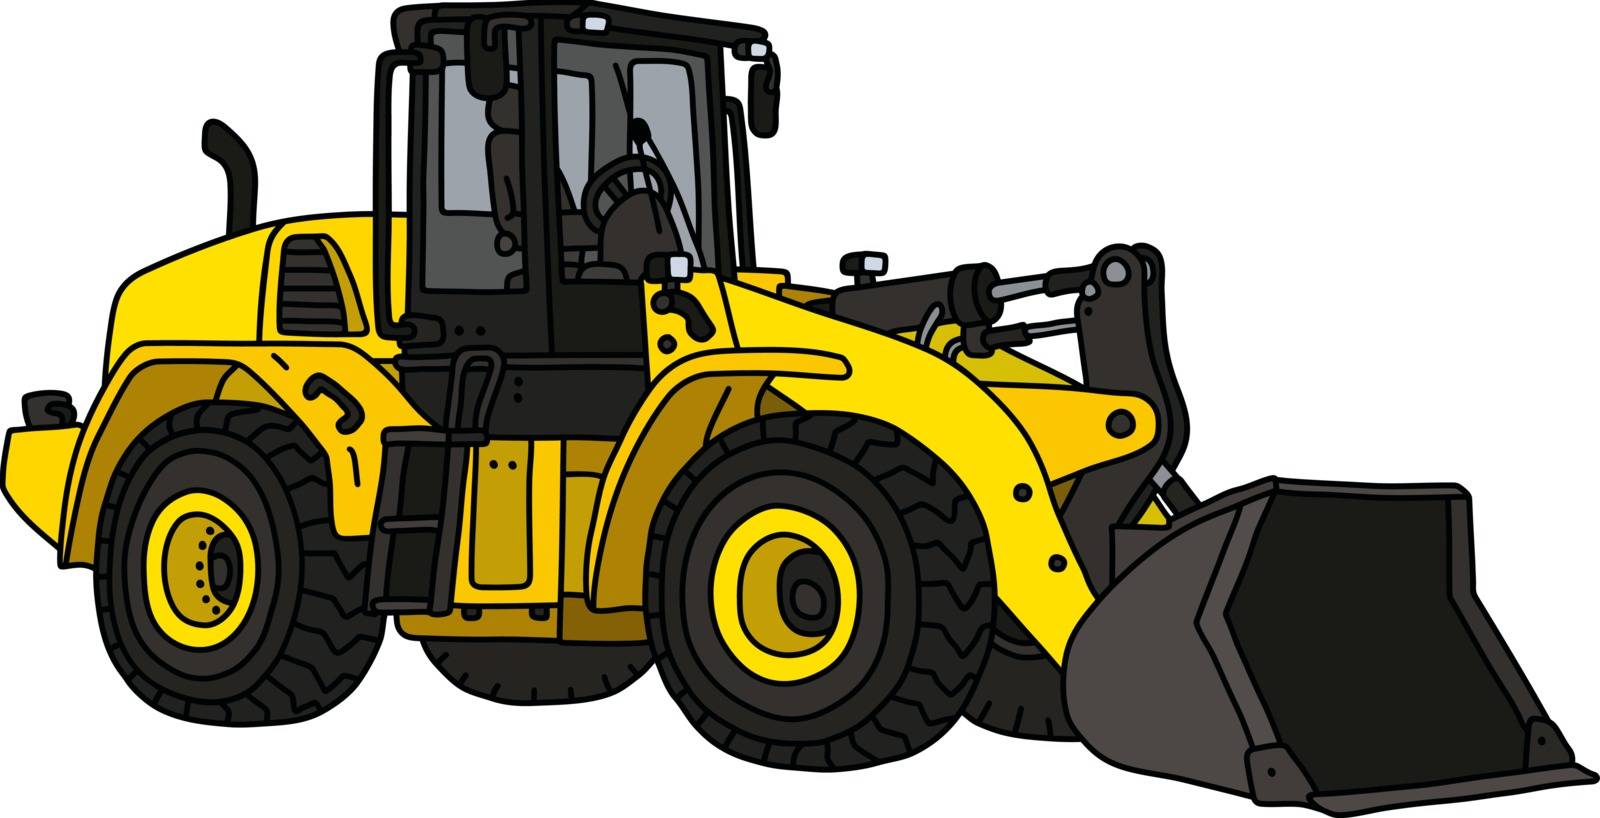 The hand drawing of a yellow heavy construction machine